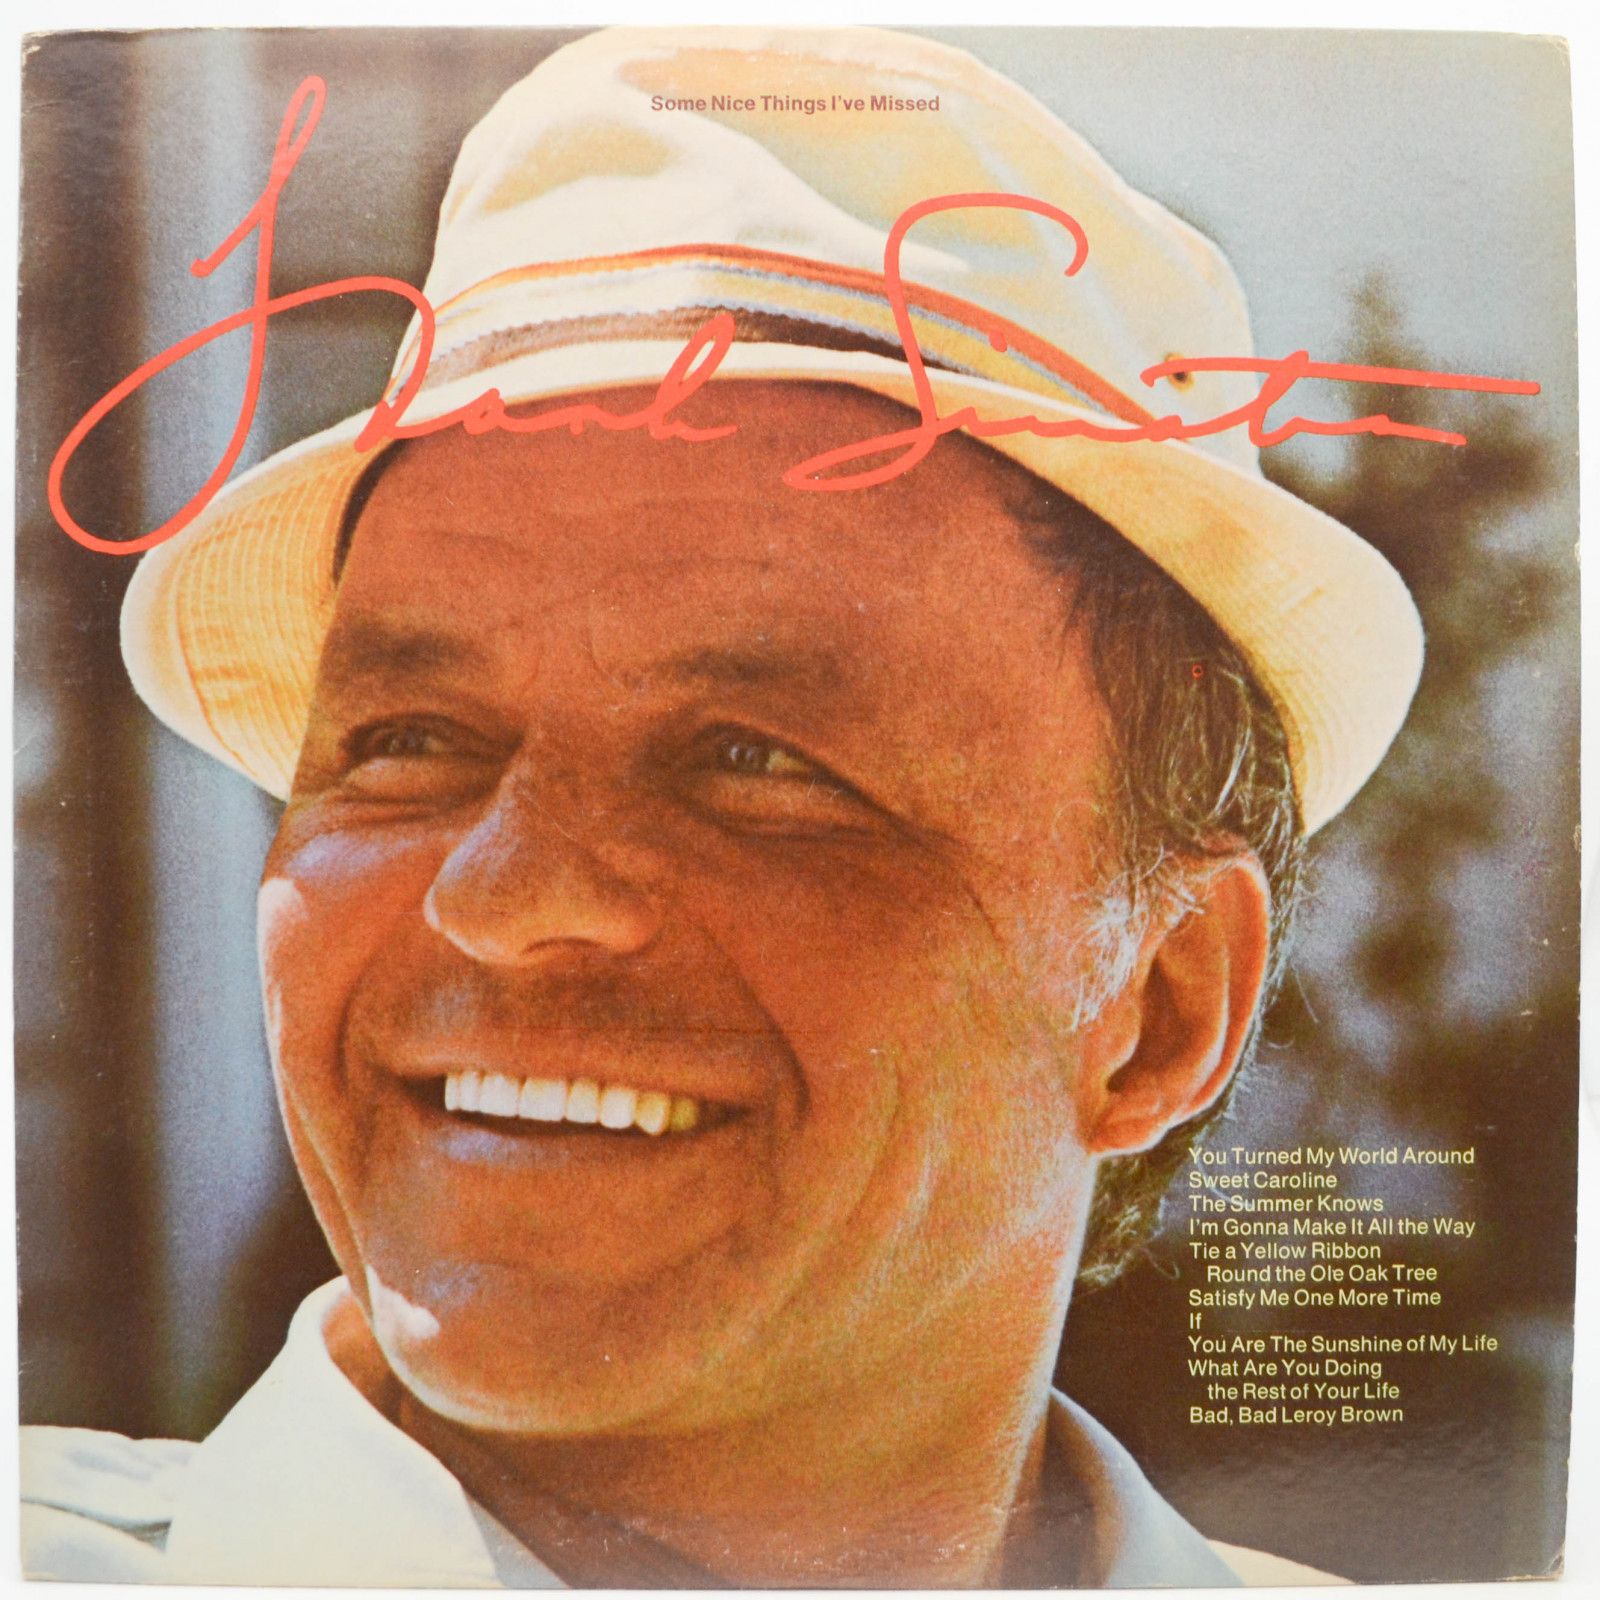 Frank Sinatra — Some Nice Things I've Missed (USA), 1974